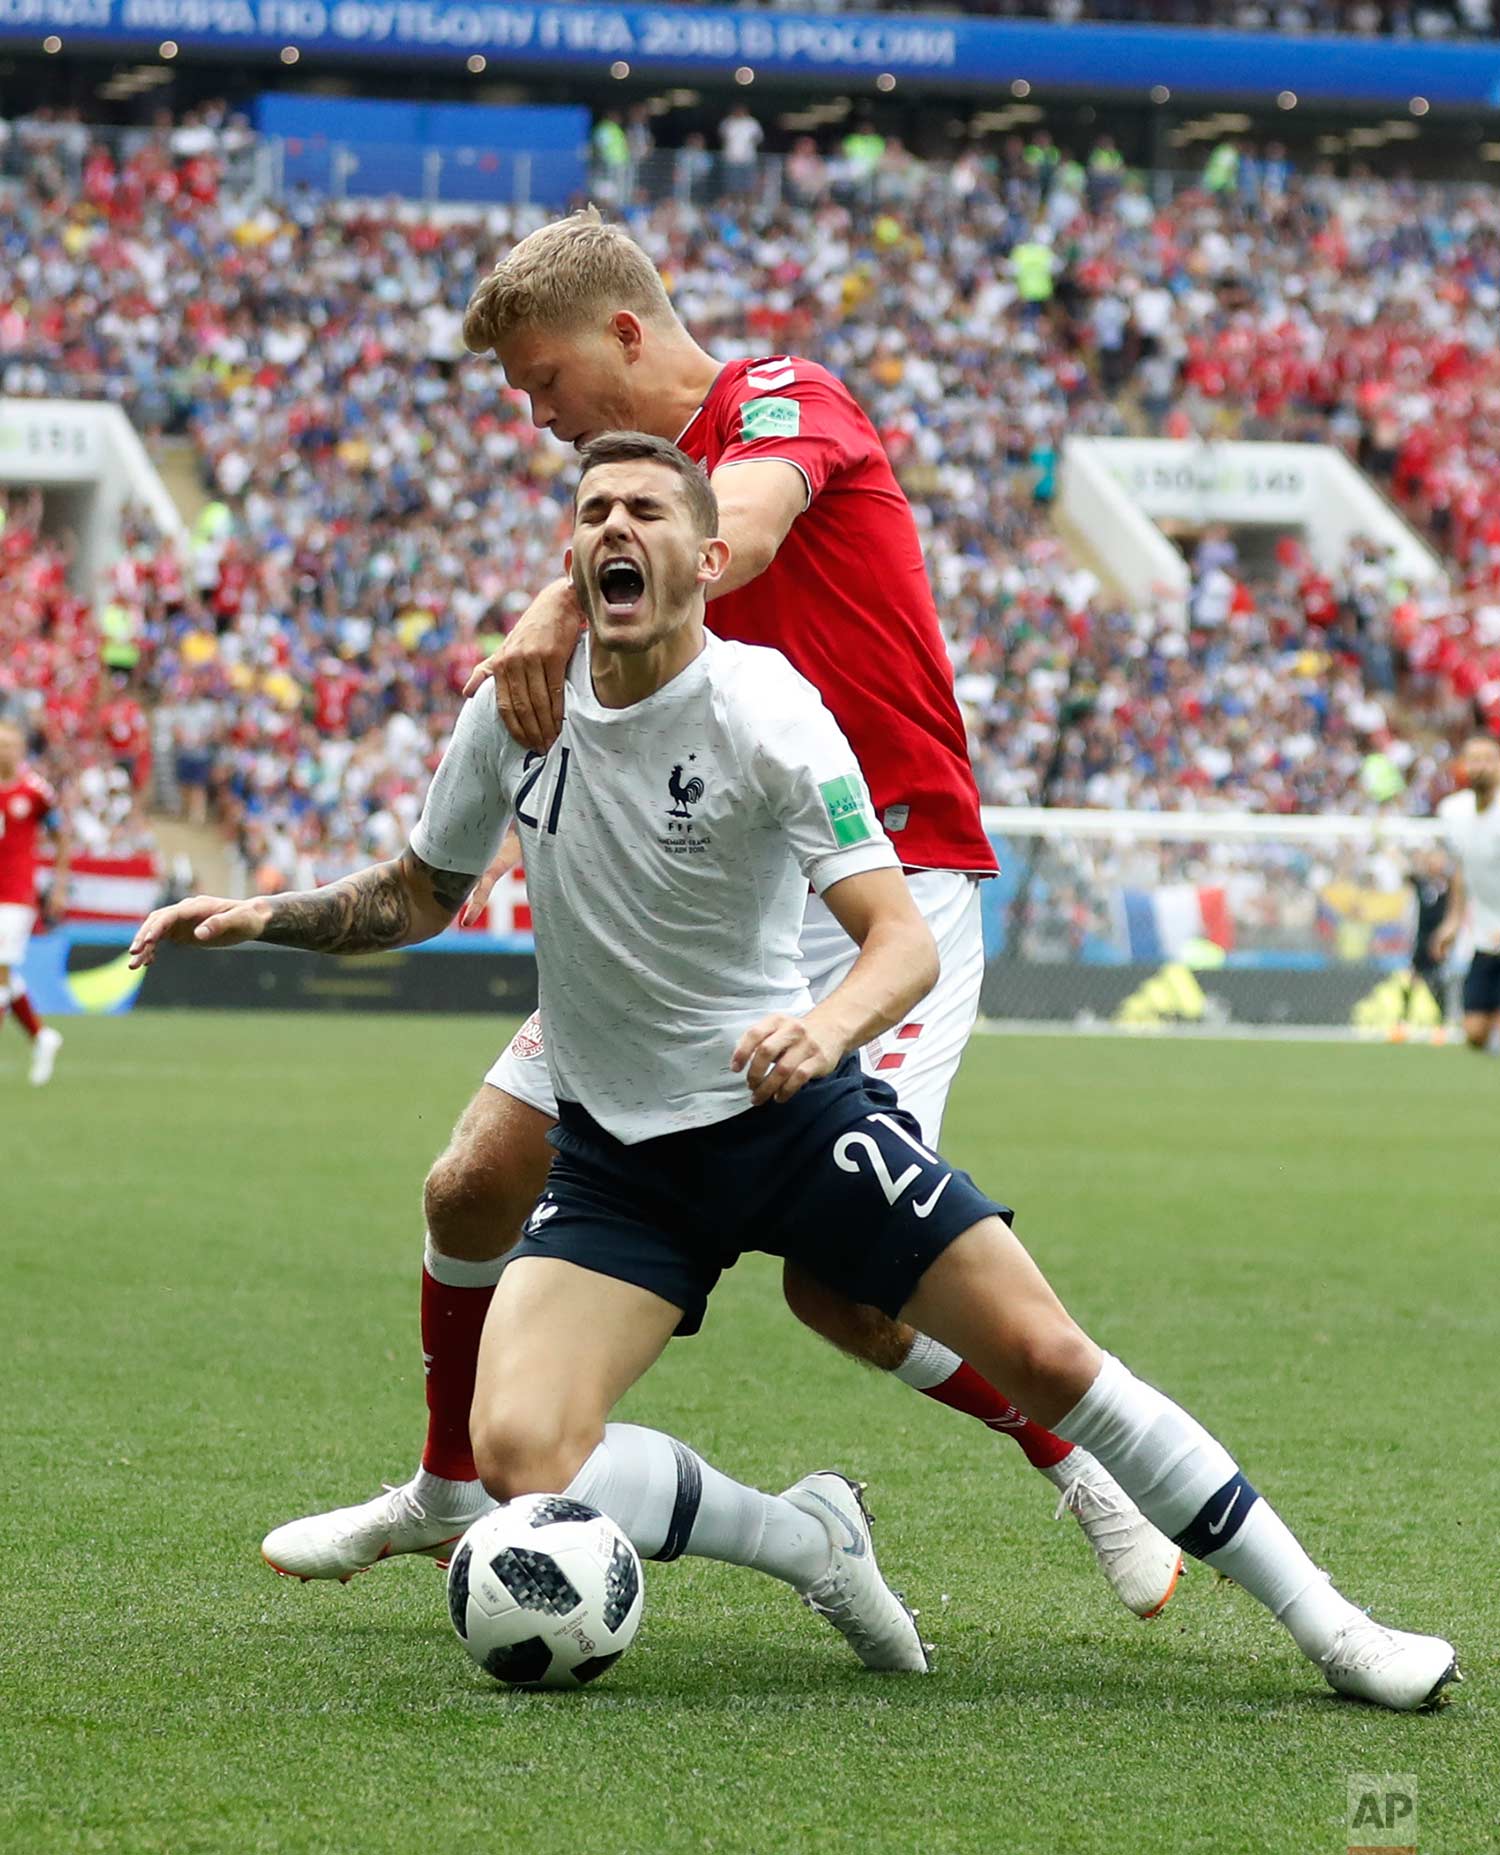  Denmark's Andreas Cornelius, top, vies for the ball with France's Lucas Hernandez during the group C match between Denmark and France at the 2018 soccer World Cup at the Luzhniki Stadium in Moscow, Russia, Tuesday, June 26, 2018. (AP Photo/Antonio C